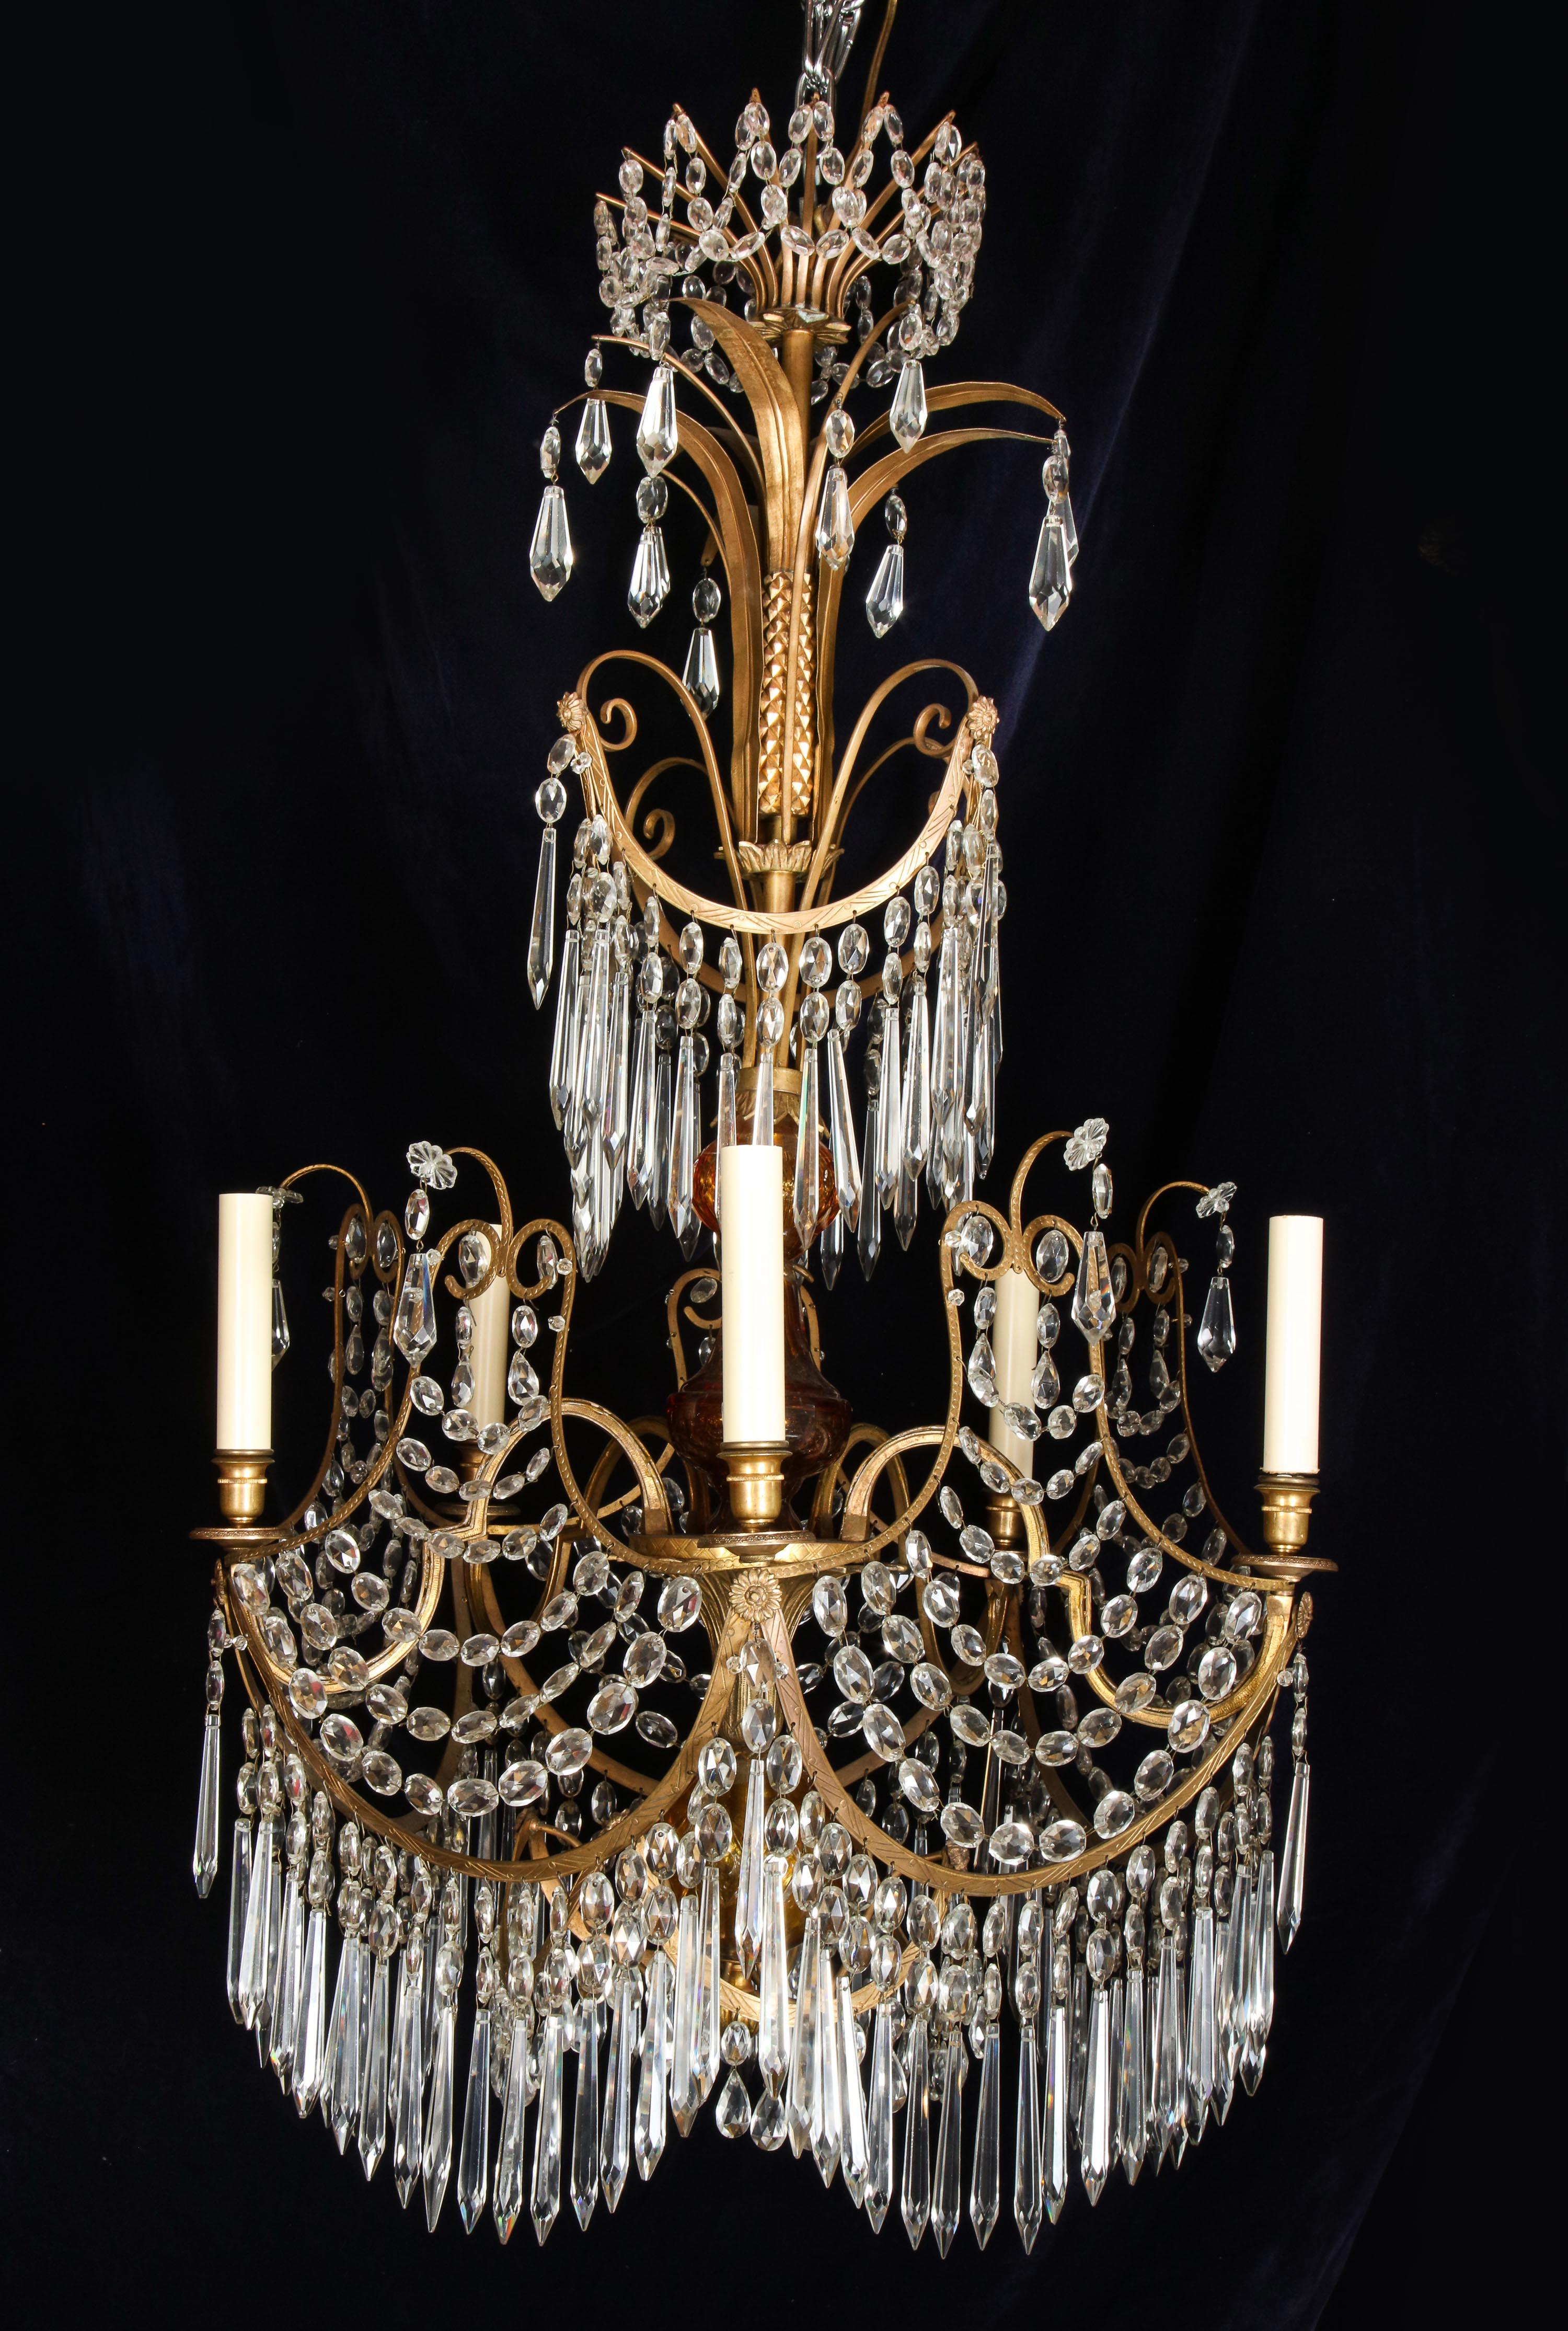 Rare Antique Russian Neoclassical Gilt Bronze and Amber Glass Chandelier For Sale 5